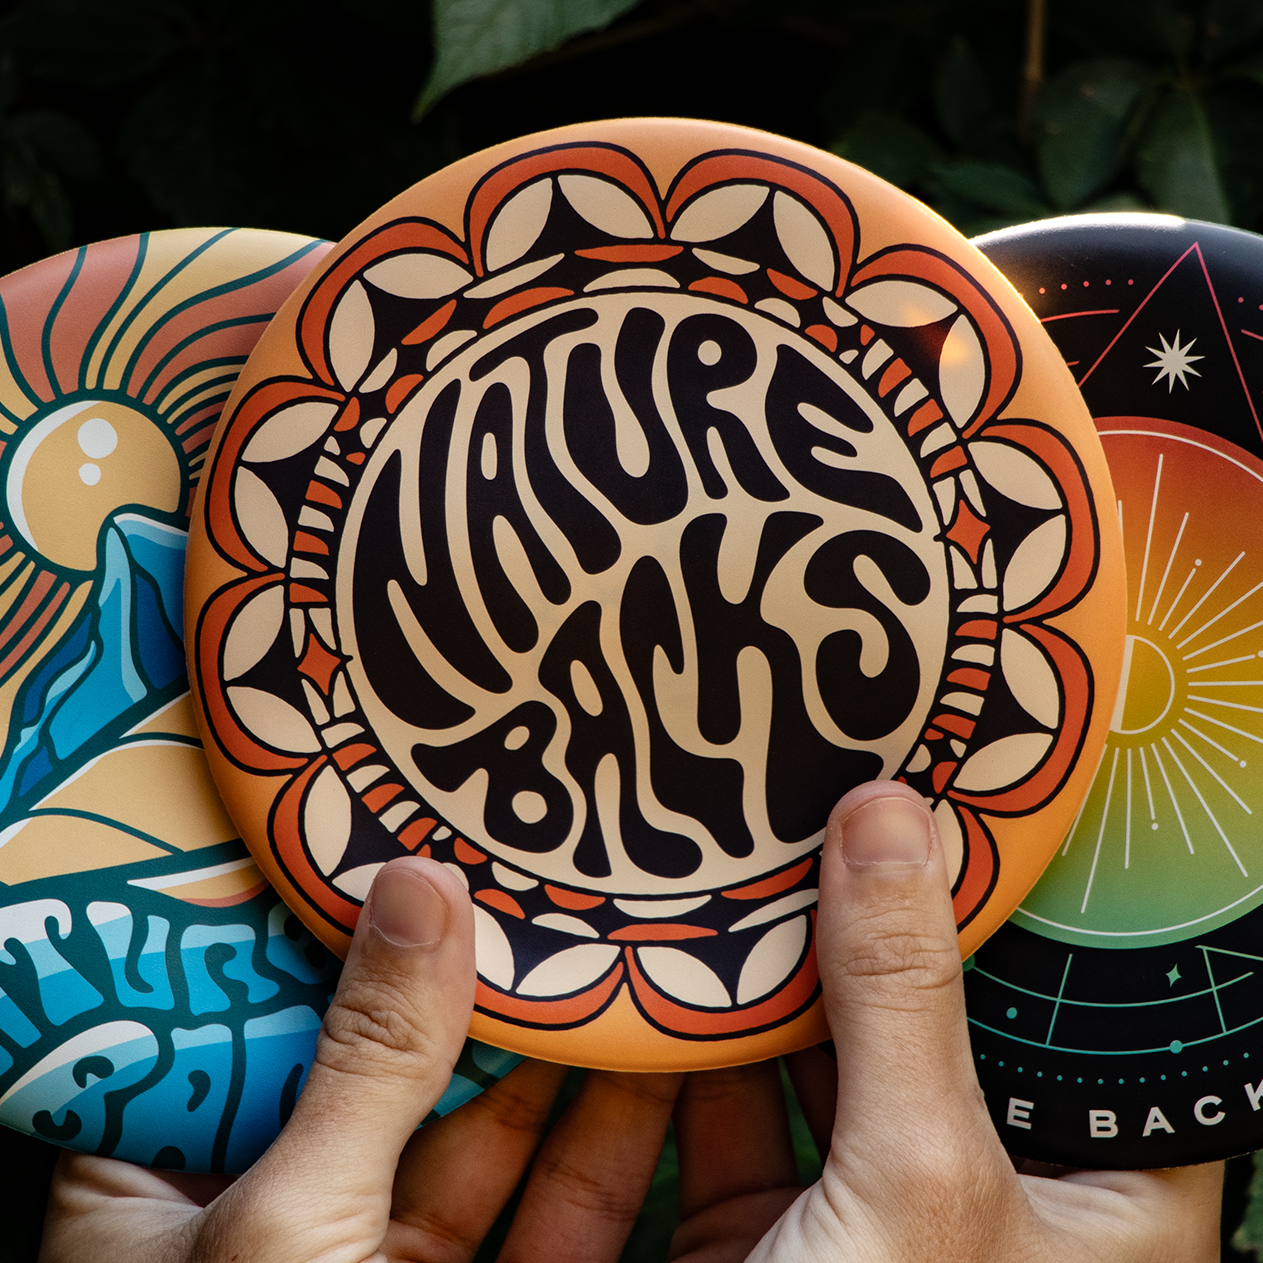 Nature Backs X Waboba Wingman Flying Disc Collab | Nature Backs Wingman Flying Disc is a Foldable Silicone disc - Made for Indoors or Outdoors